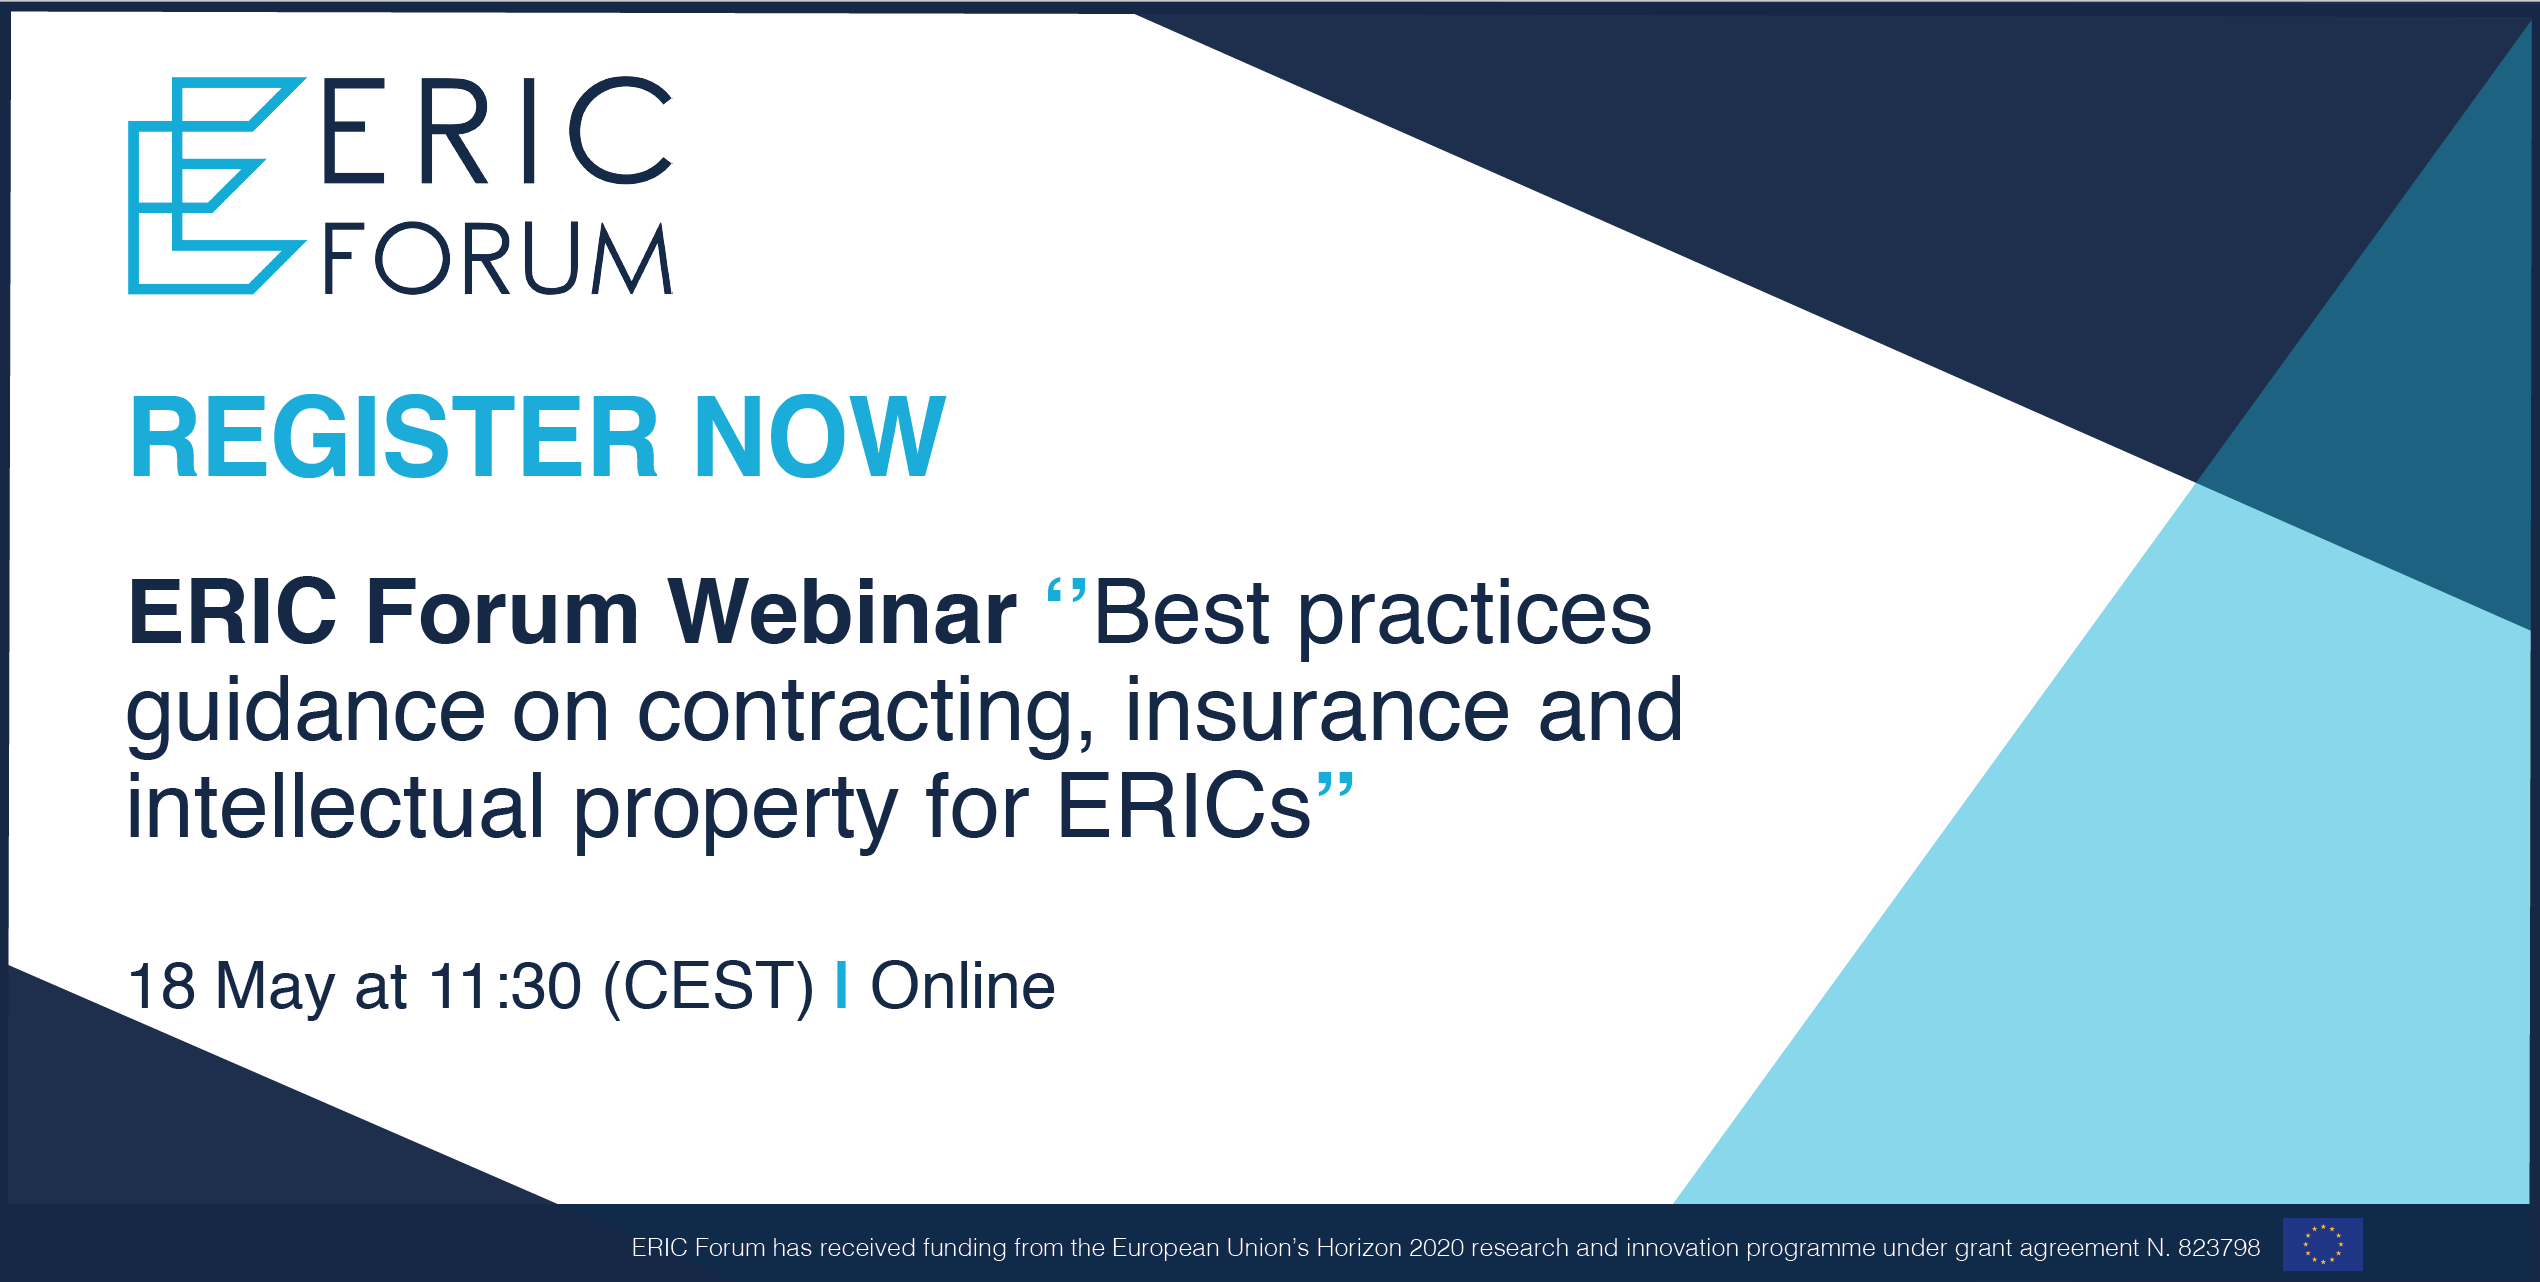 ERIC Forum webinar “Best practices guidance on contracting, insurance and intellectual property for ERICs